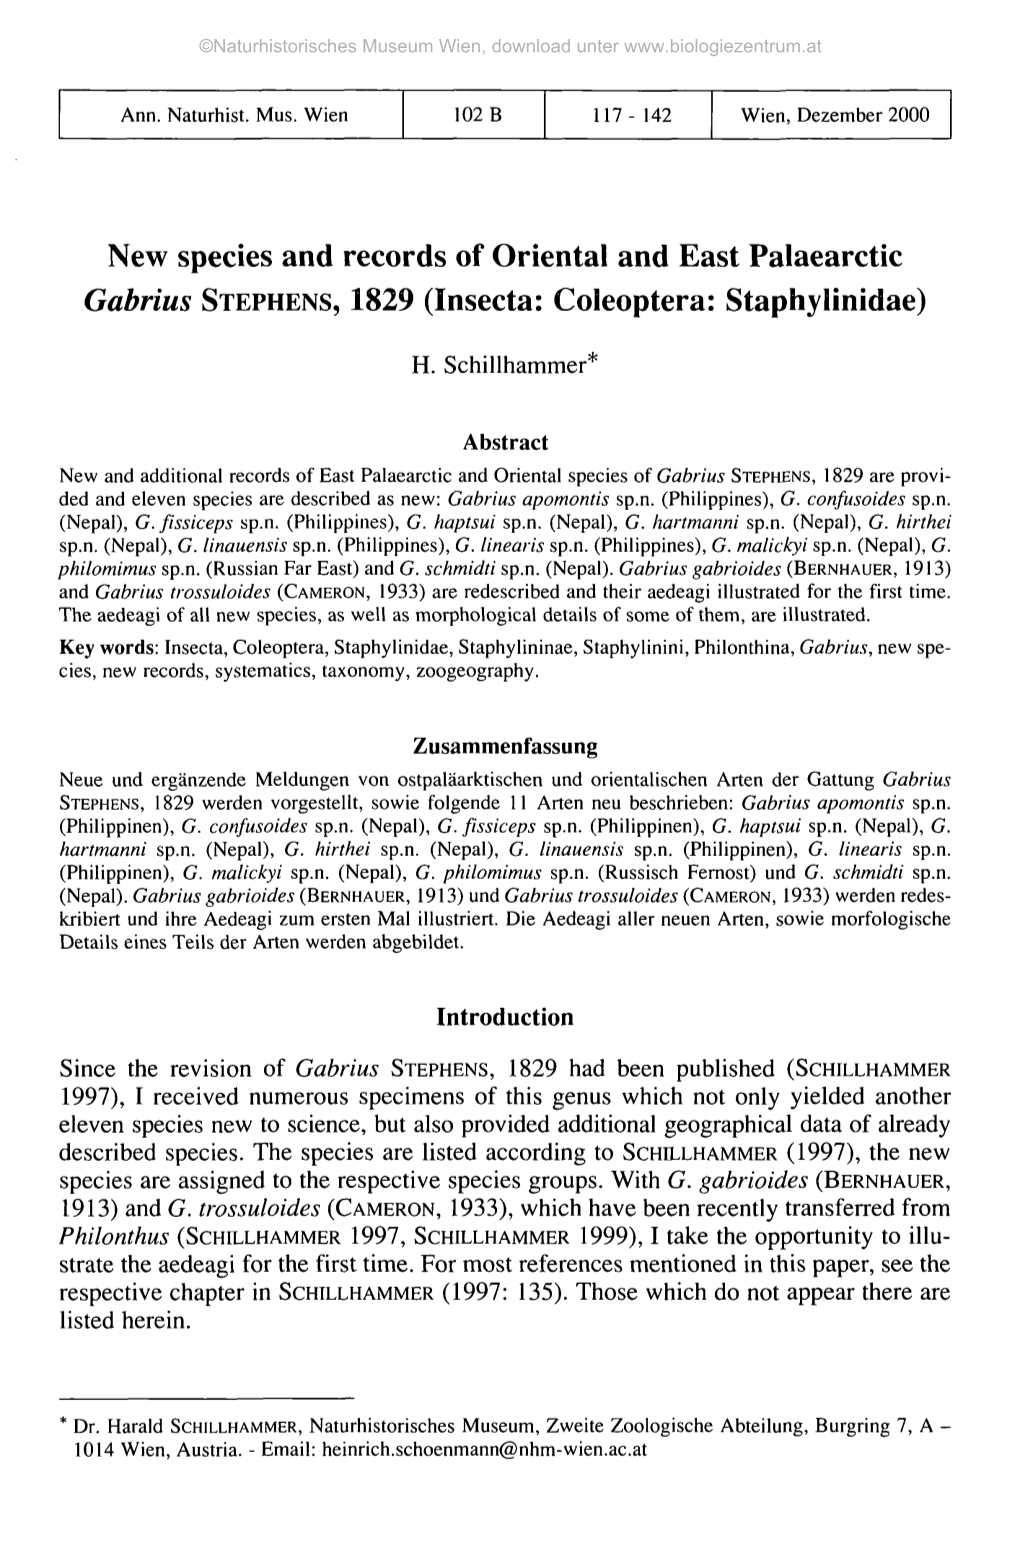 New Species and Records of Oriental and East Palaearctic Gabrius STEPHENS, 1829 (Insecta: Coleoptera: Staphylinidae)